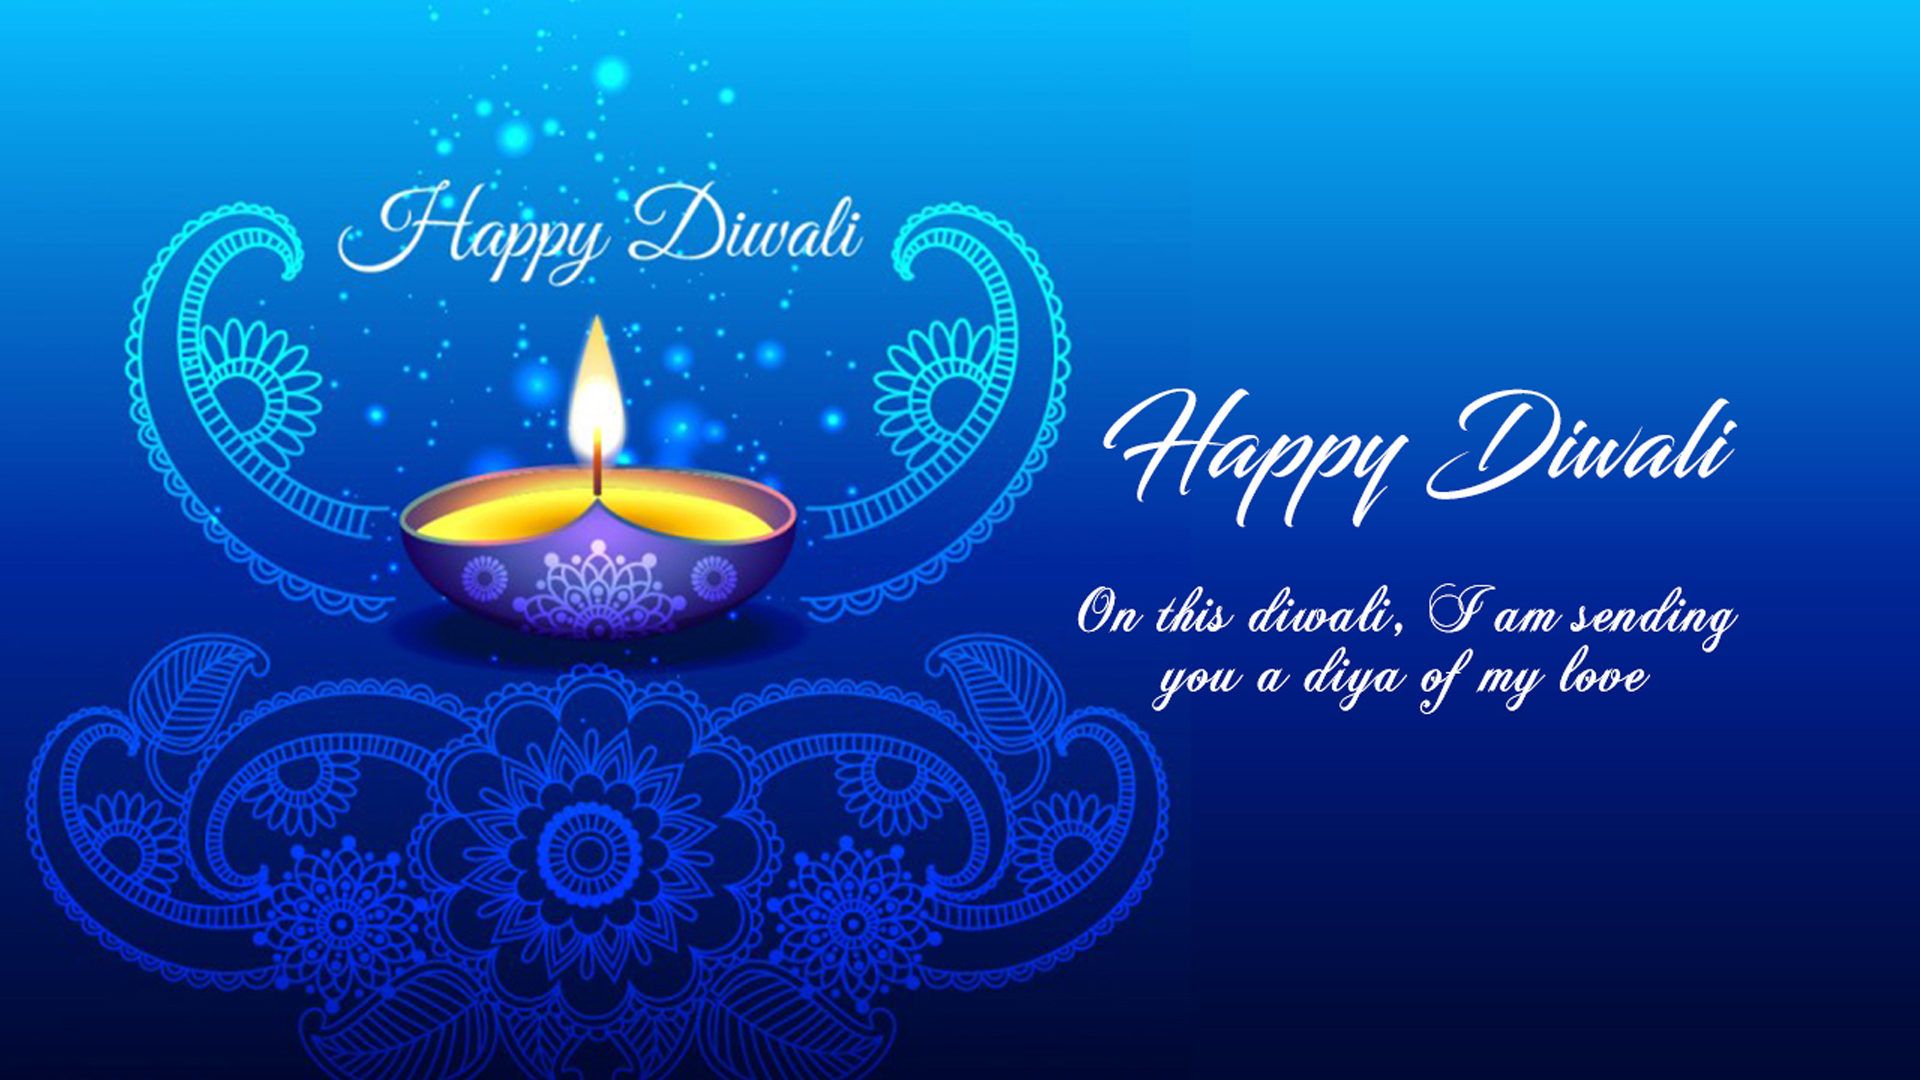 Happy Diwali 2021 Photo Wishes Greeting Card Blue Background Download 1920x1080, Wallpaper13.com